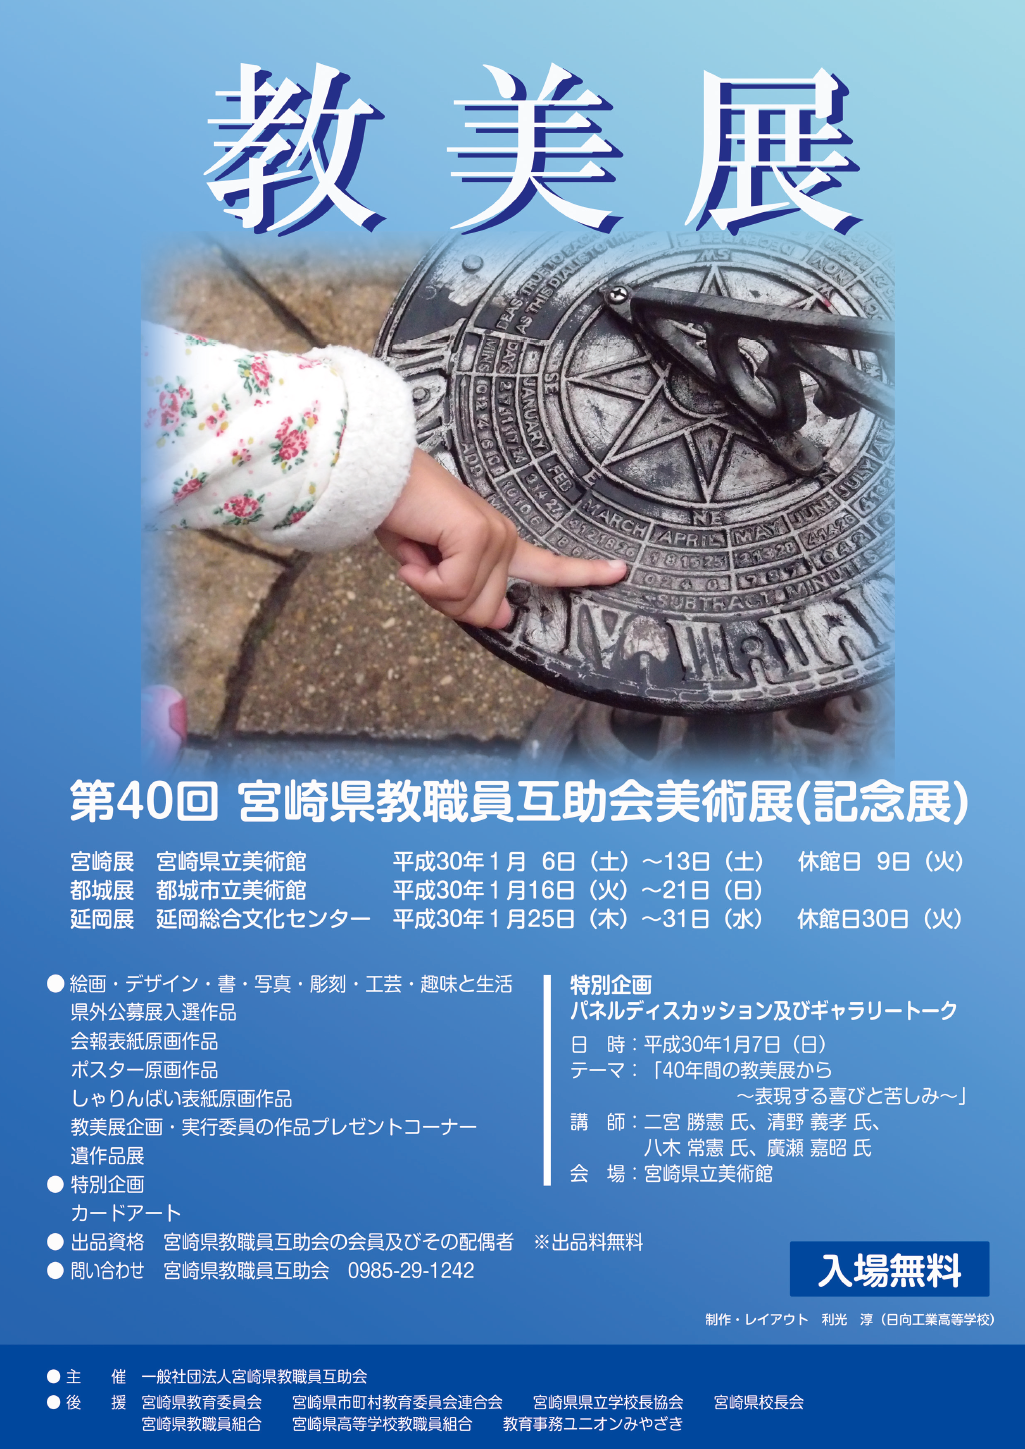 /publiculture/exhibition/img/H29kyoubi-poster.png